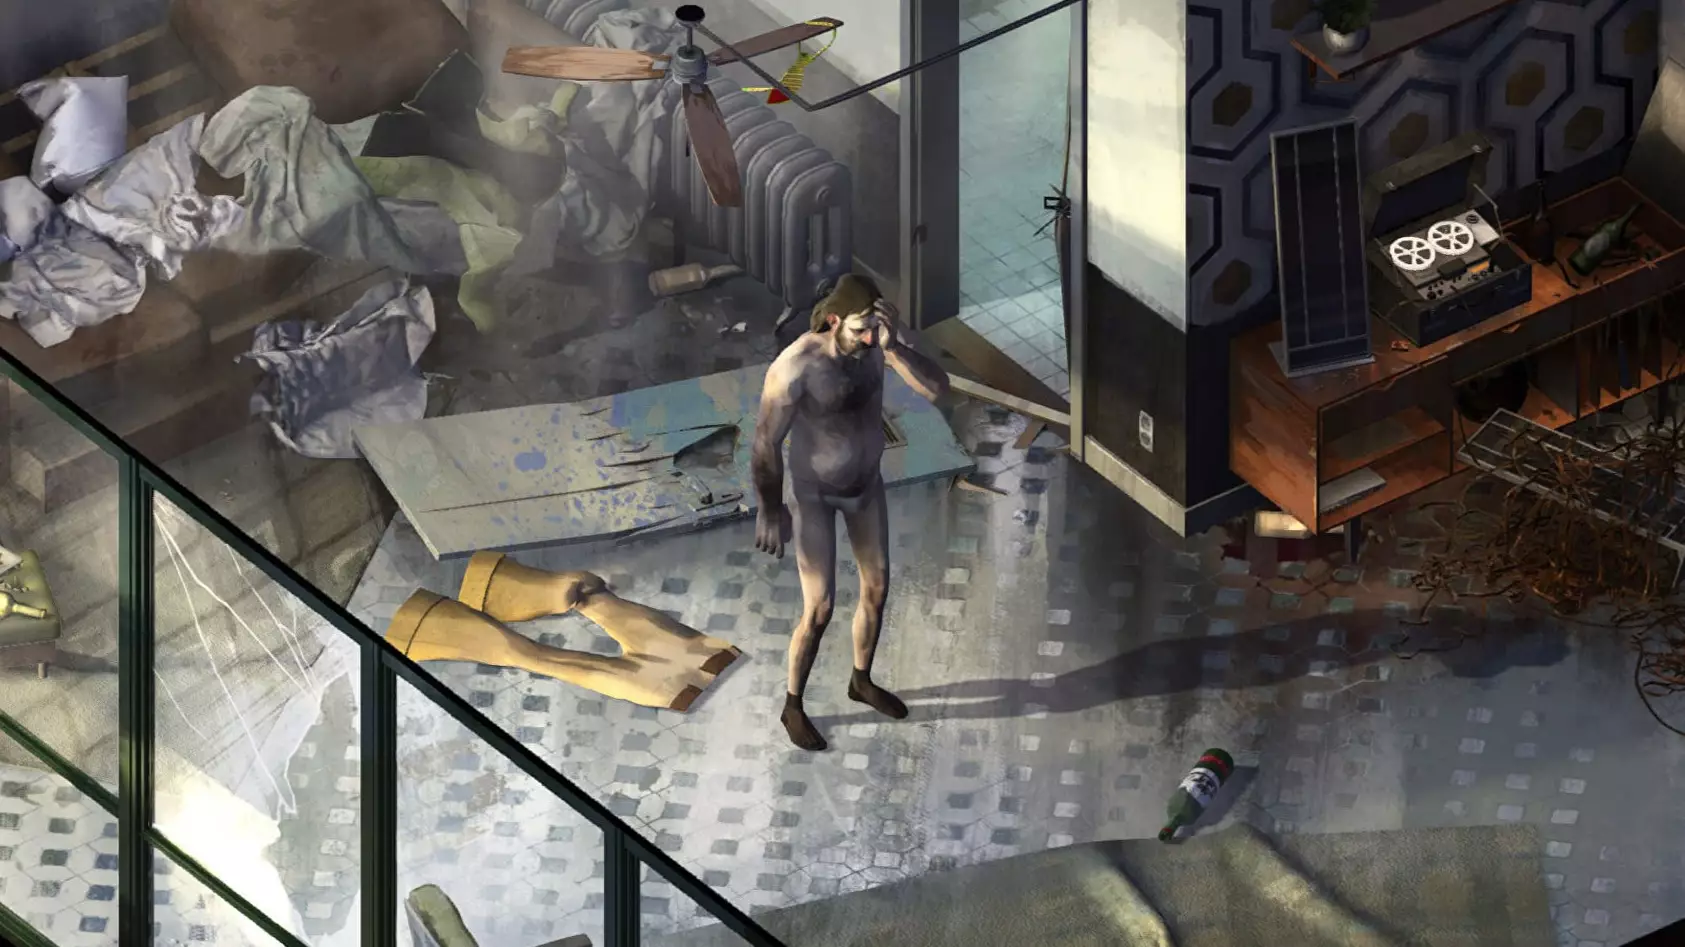 Video Game Disco Elysium Banned In Australia For Going Against ‘Standards Of Morality’